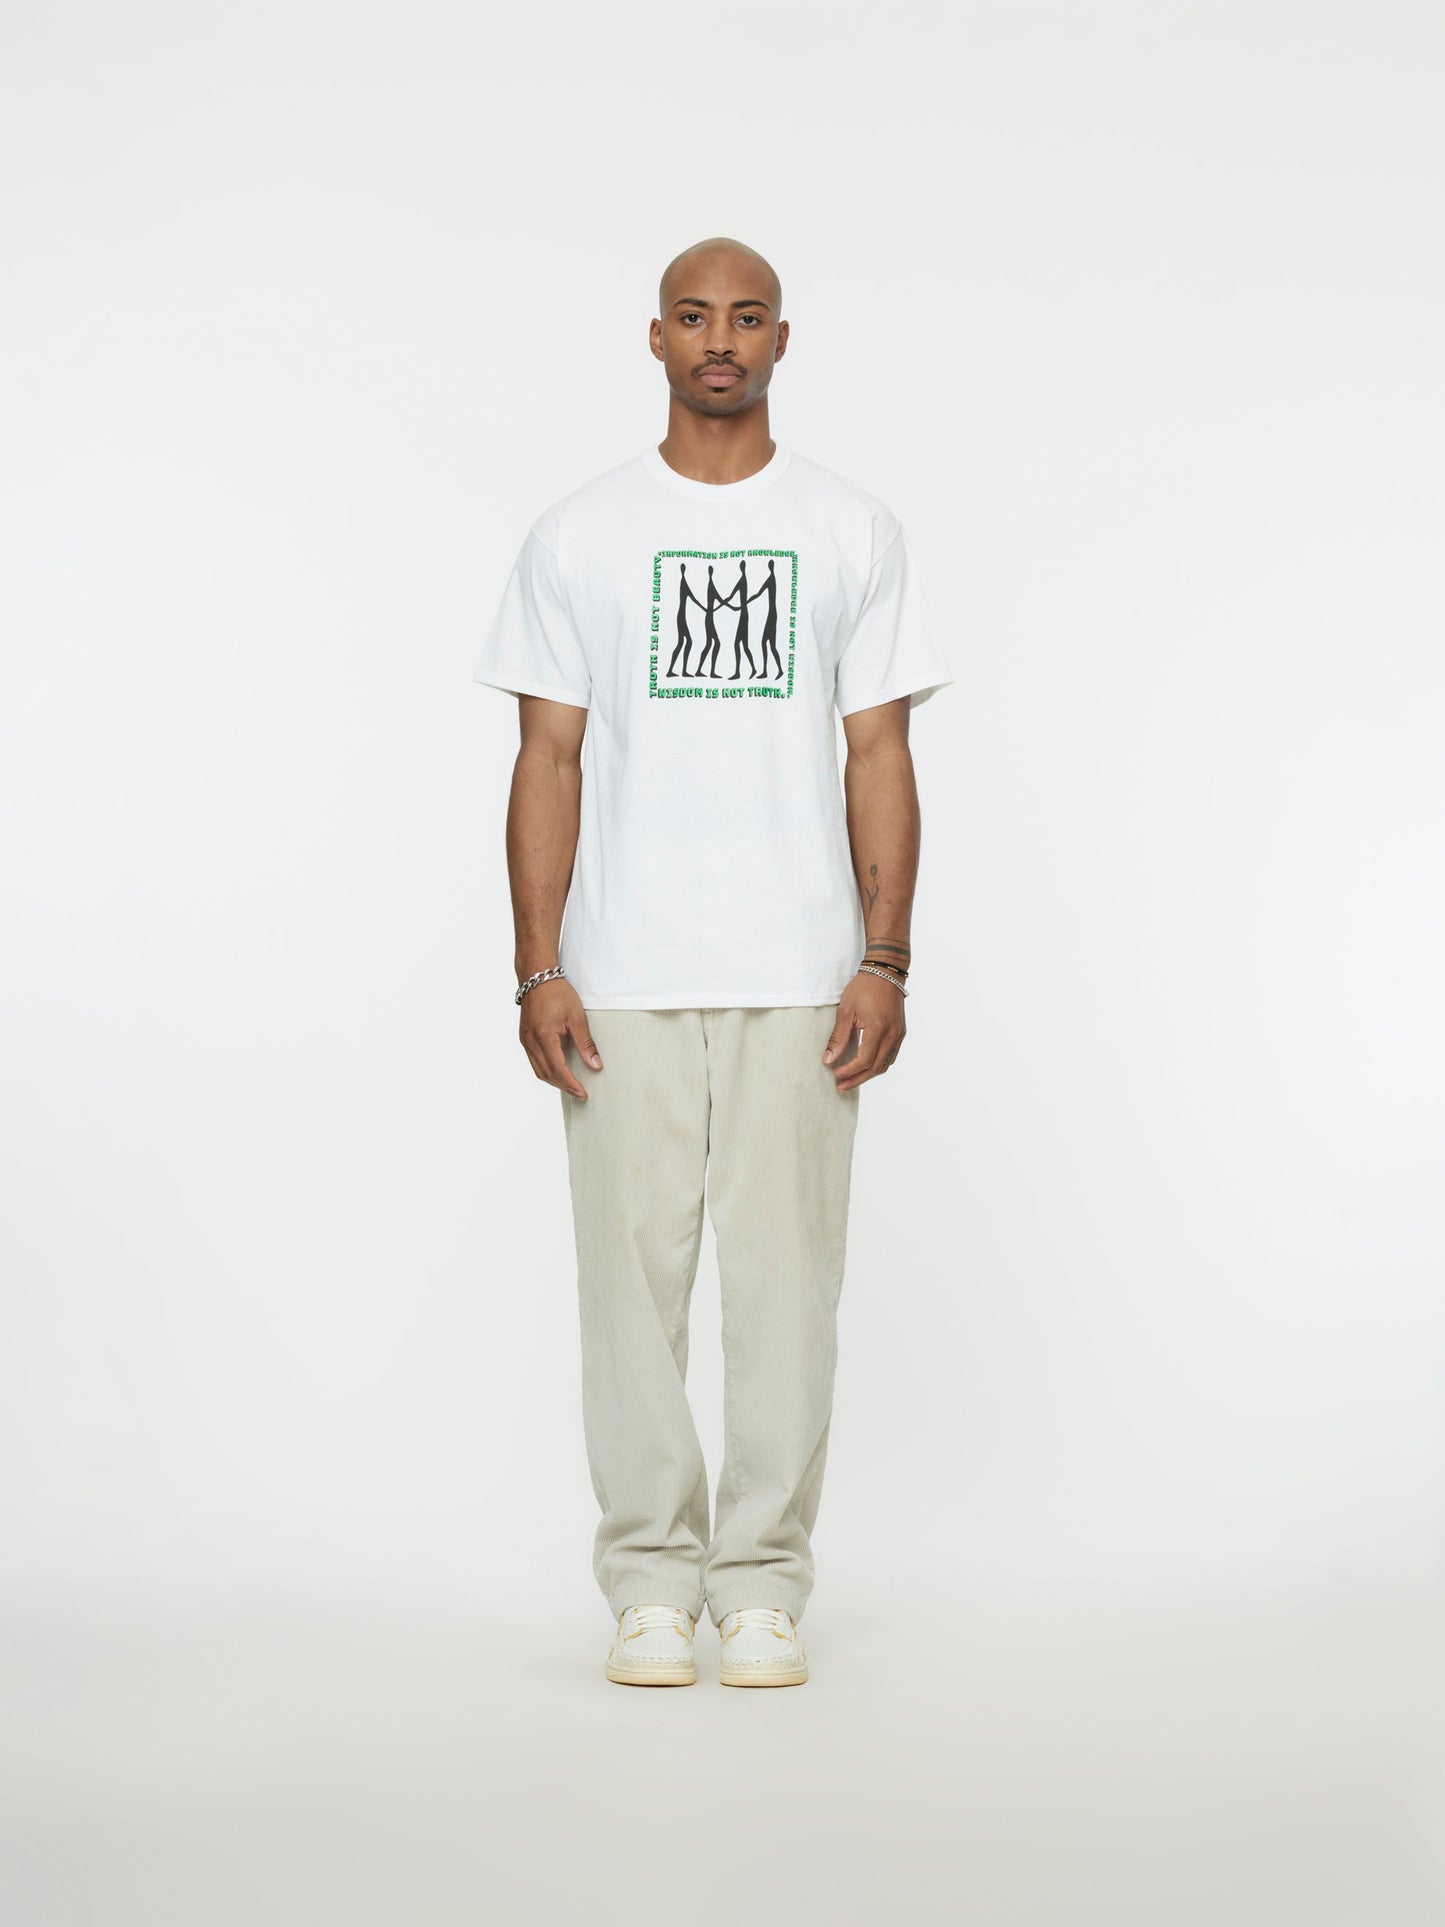 Truth is Beauty Tee (White)